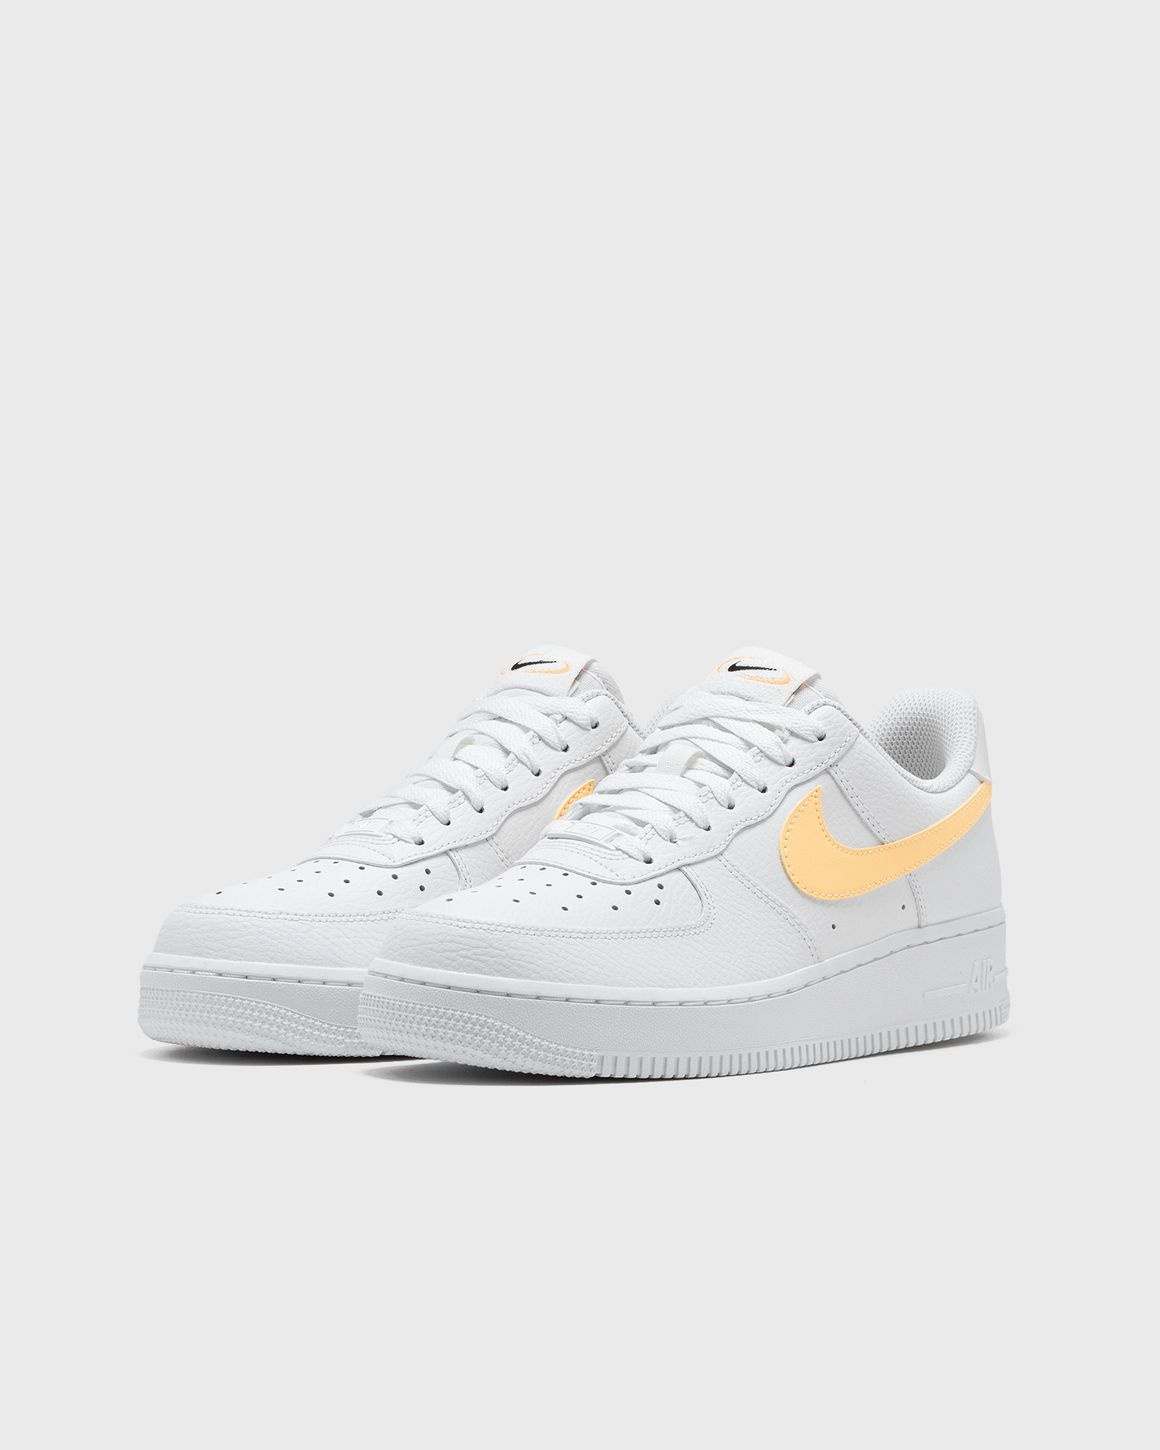 WMNS NIKE AIR FORCE 1 '07 - 2